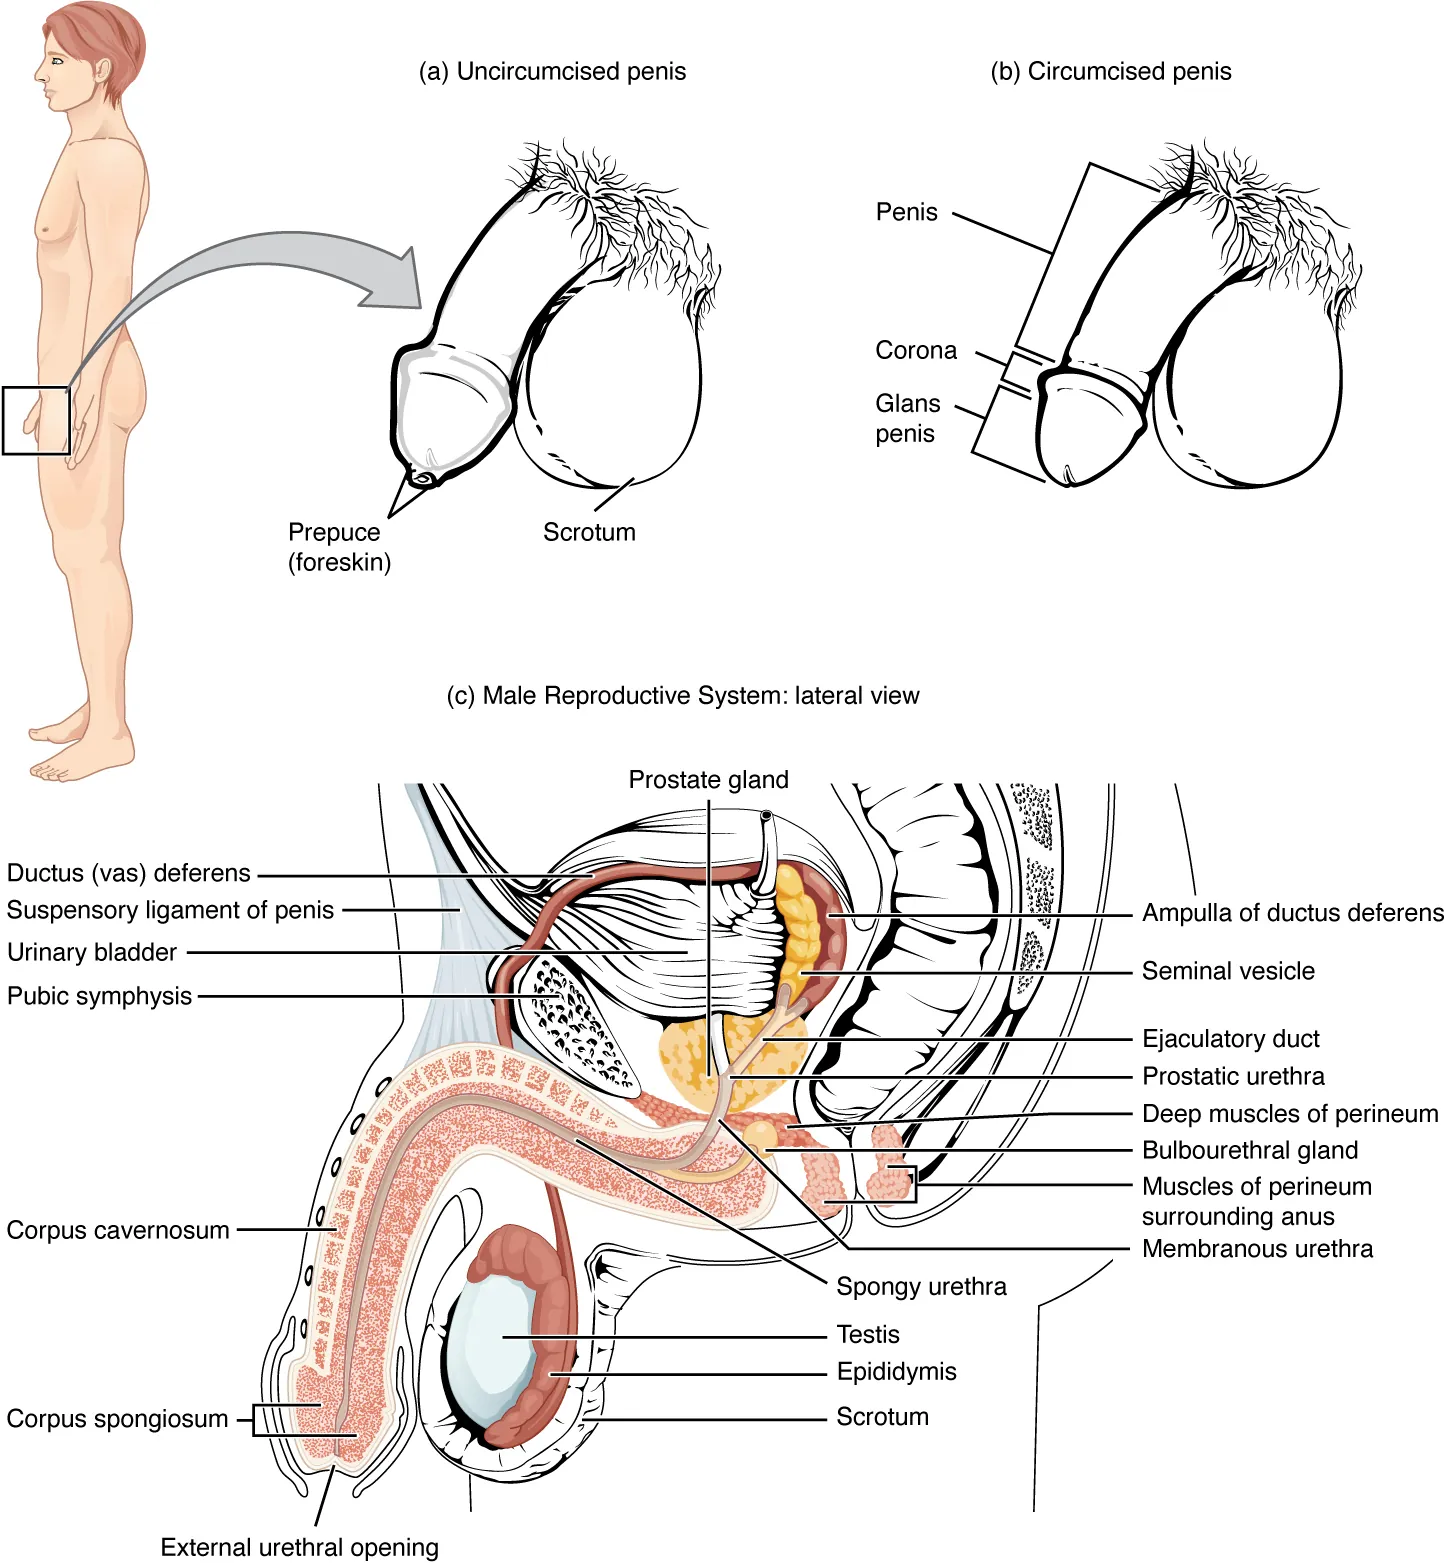 This figure shows the different organs in the testicular reproductive system. The top panel shows the side view of a man and an uncircumcised and a circumcised penis. The bottom panel shows the lateral view of the male reproductive system and the major parts are labeled.